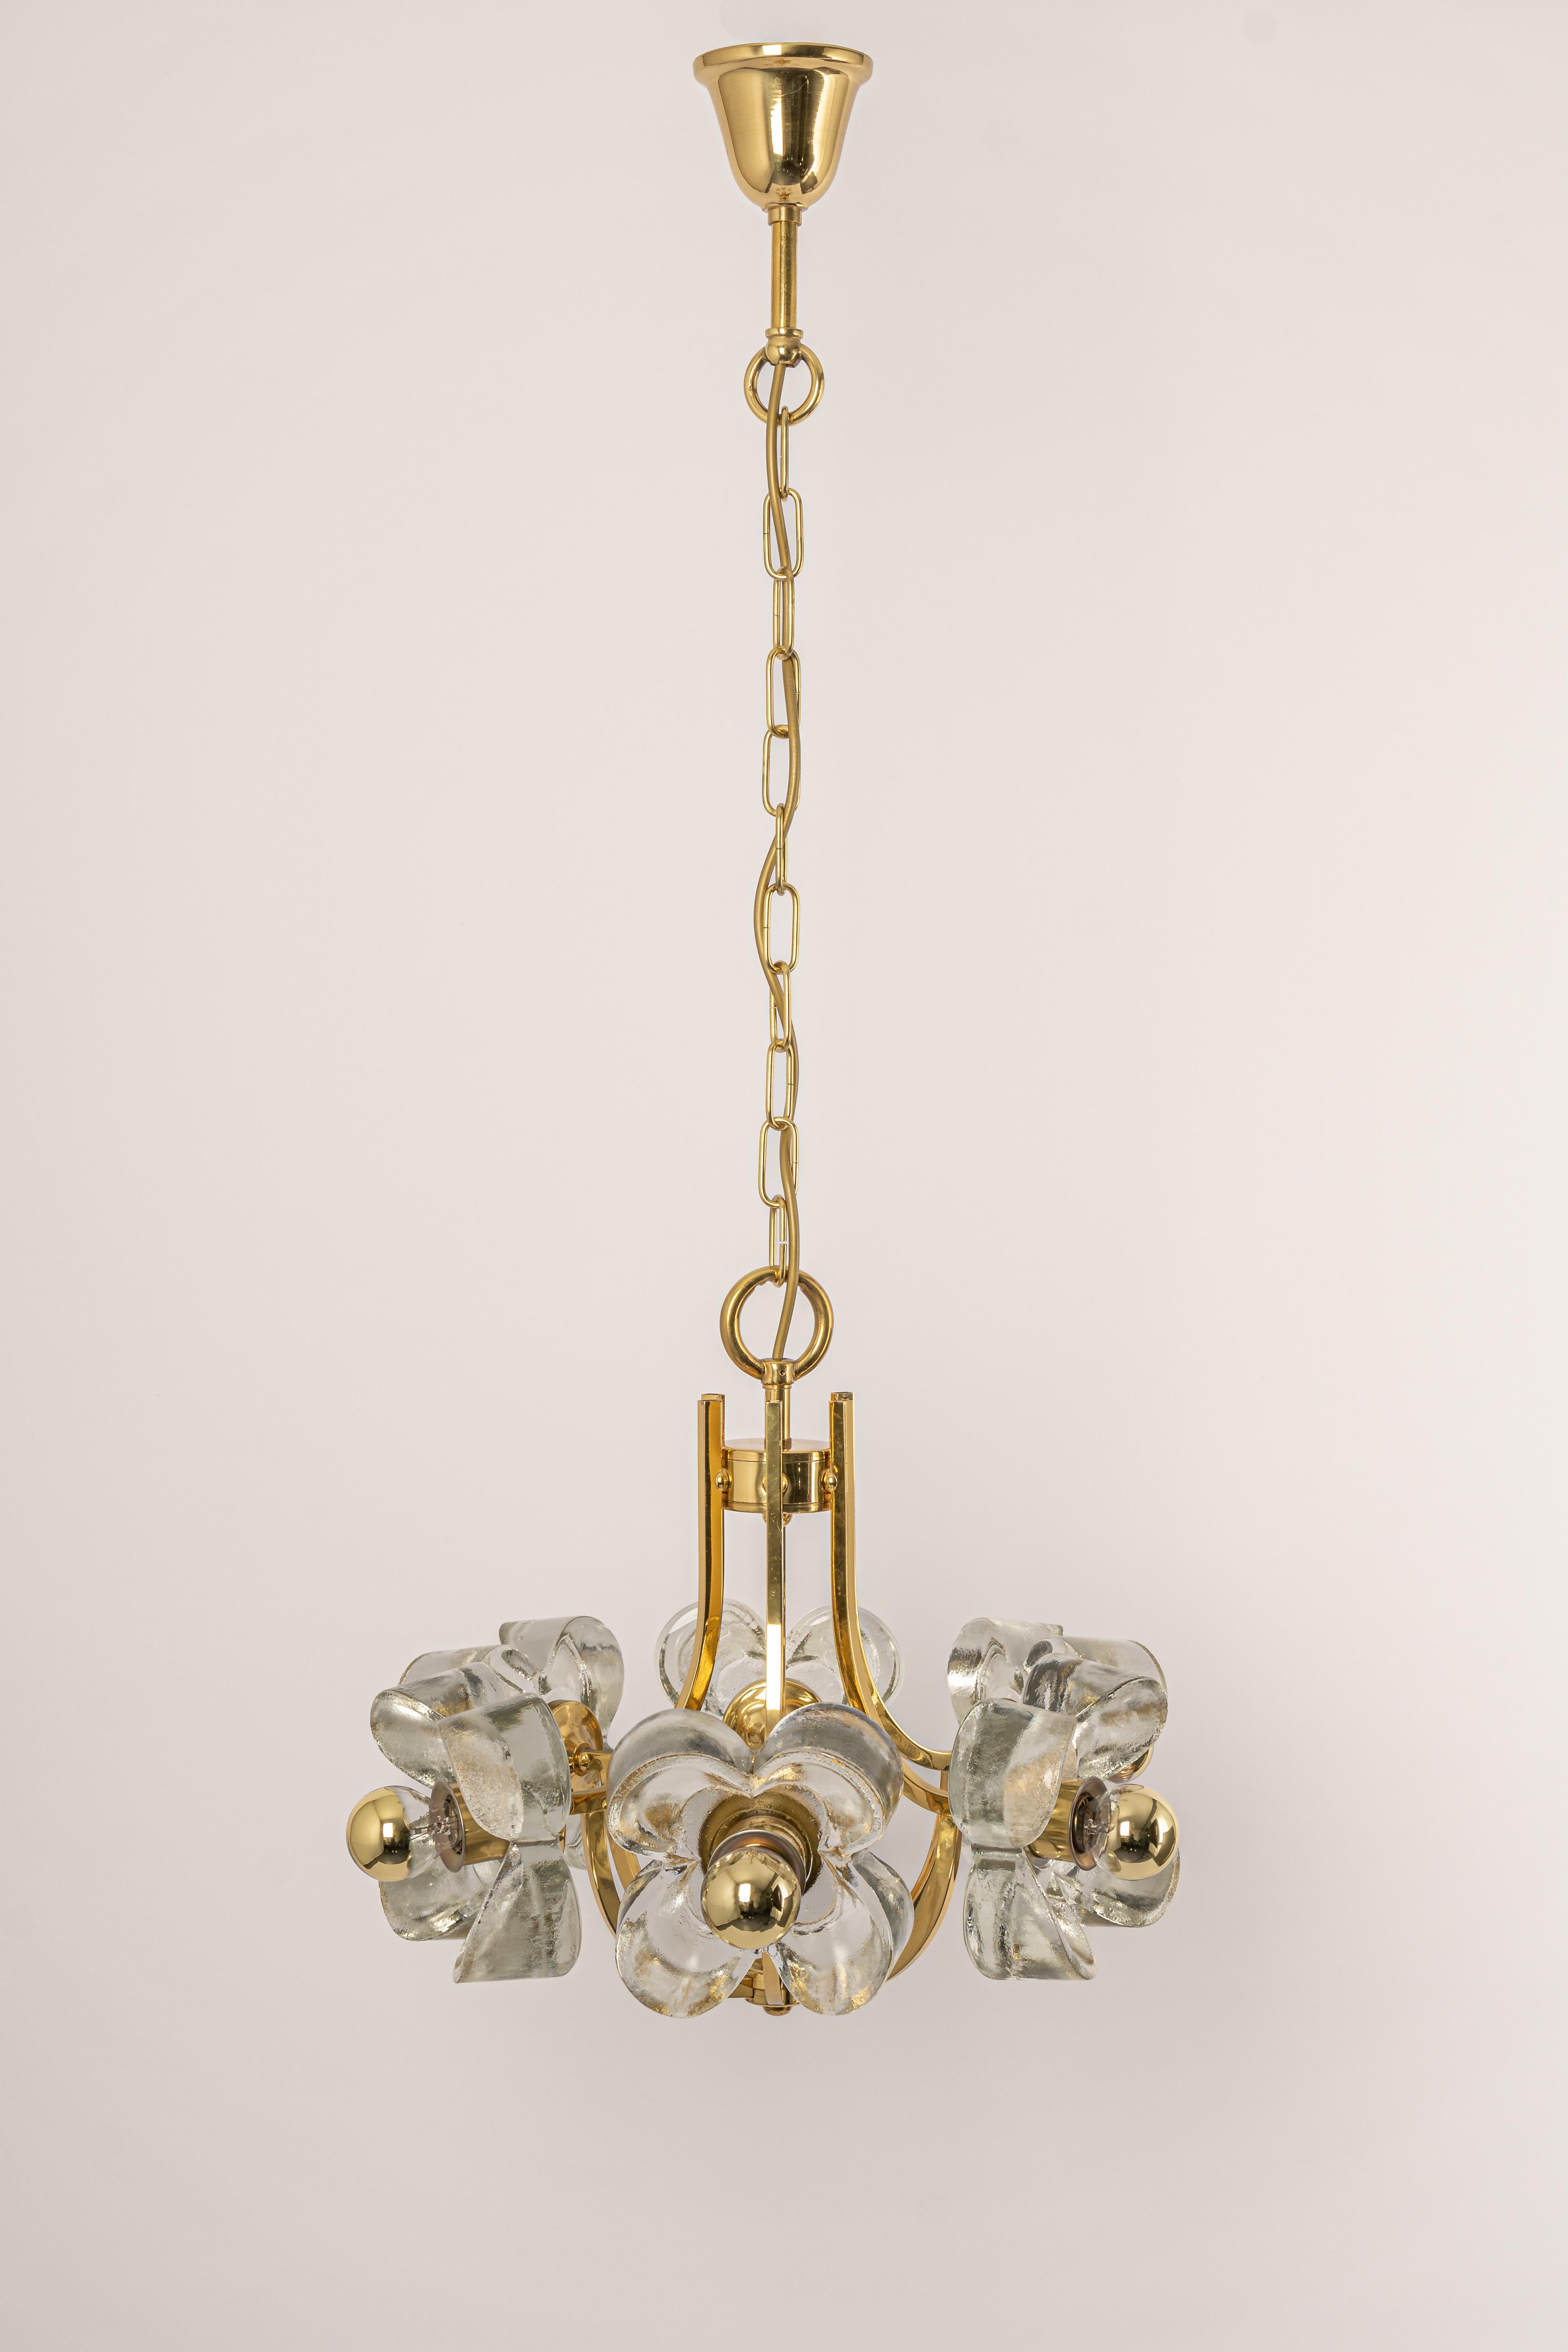 A wonderful large and high-quality gilded chandelier/pendant light fixture by Sische, Germany, 1970s

It is made of a brass frame decorated with 6 crystal glasses.
The lamp takes 6 small base bulbs (max. 40W per bulb).
Light bulbs are not included.